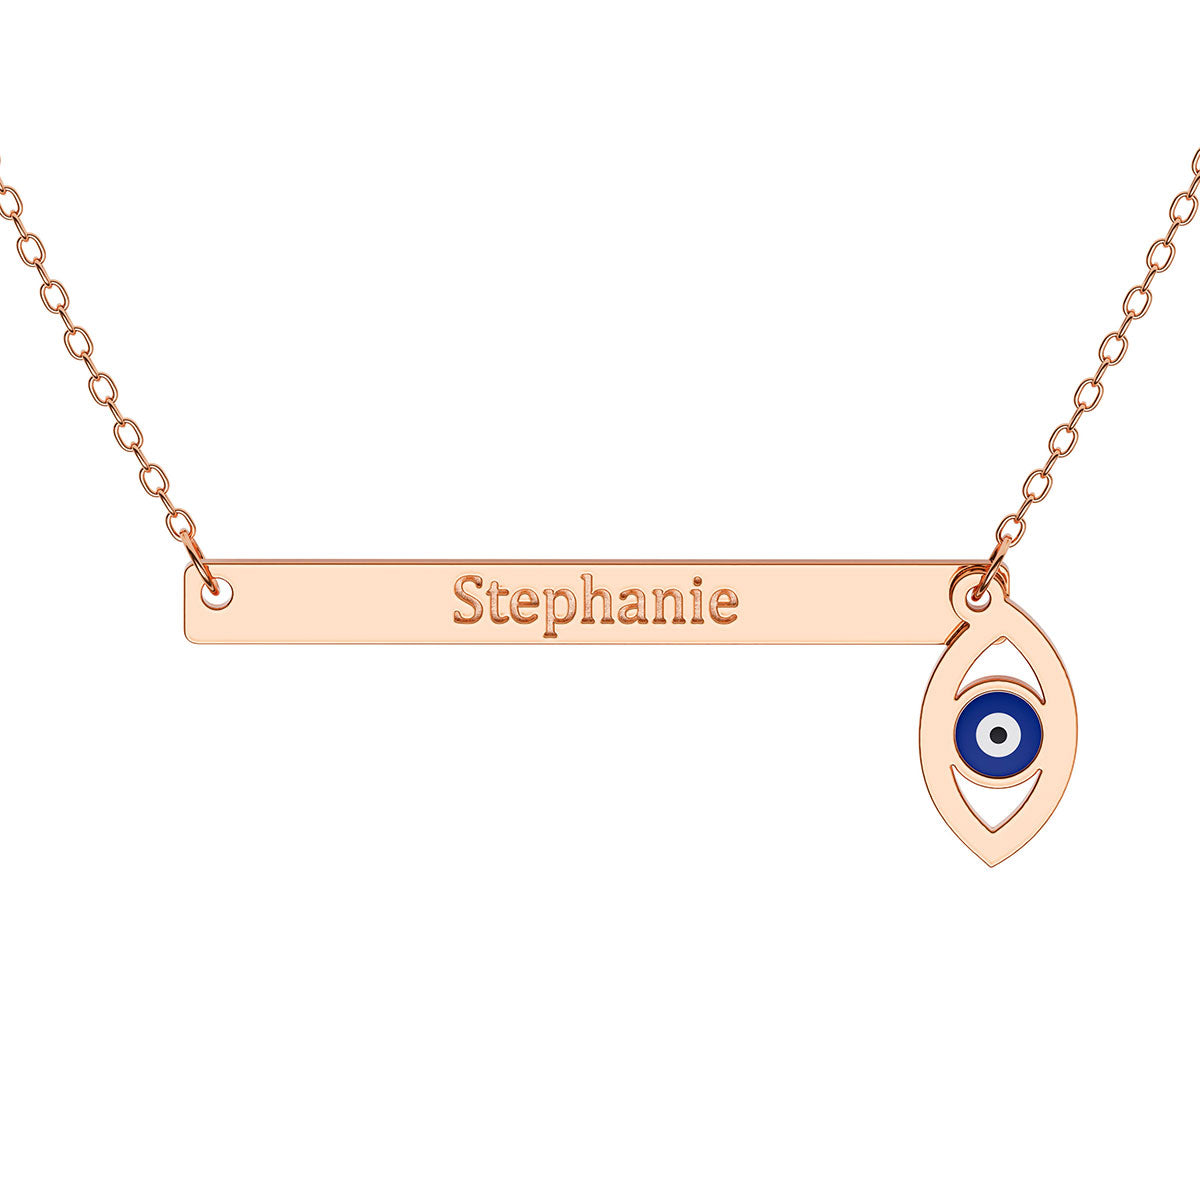 Narrow Horizontal Bar Necklace with Engraving and Evil Eye Charm